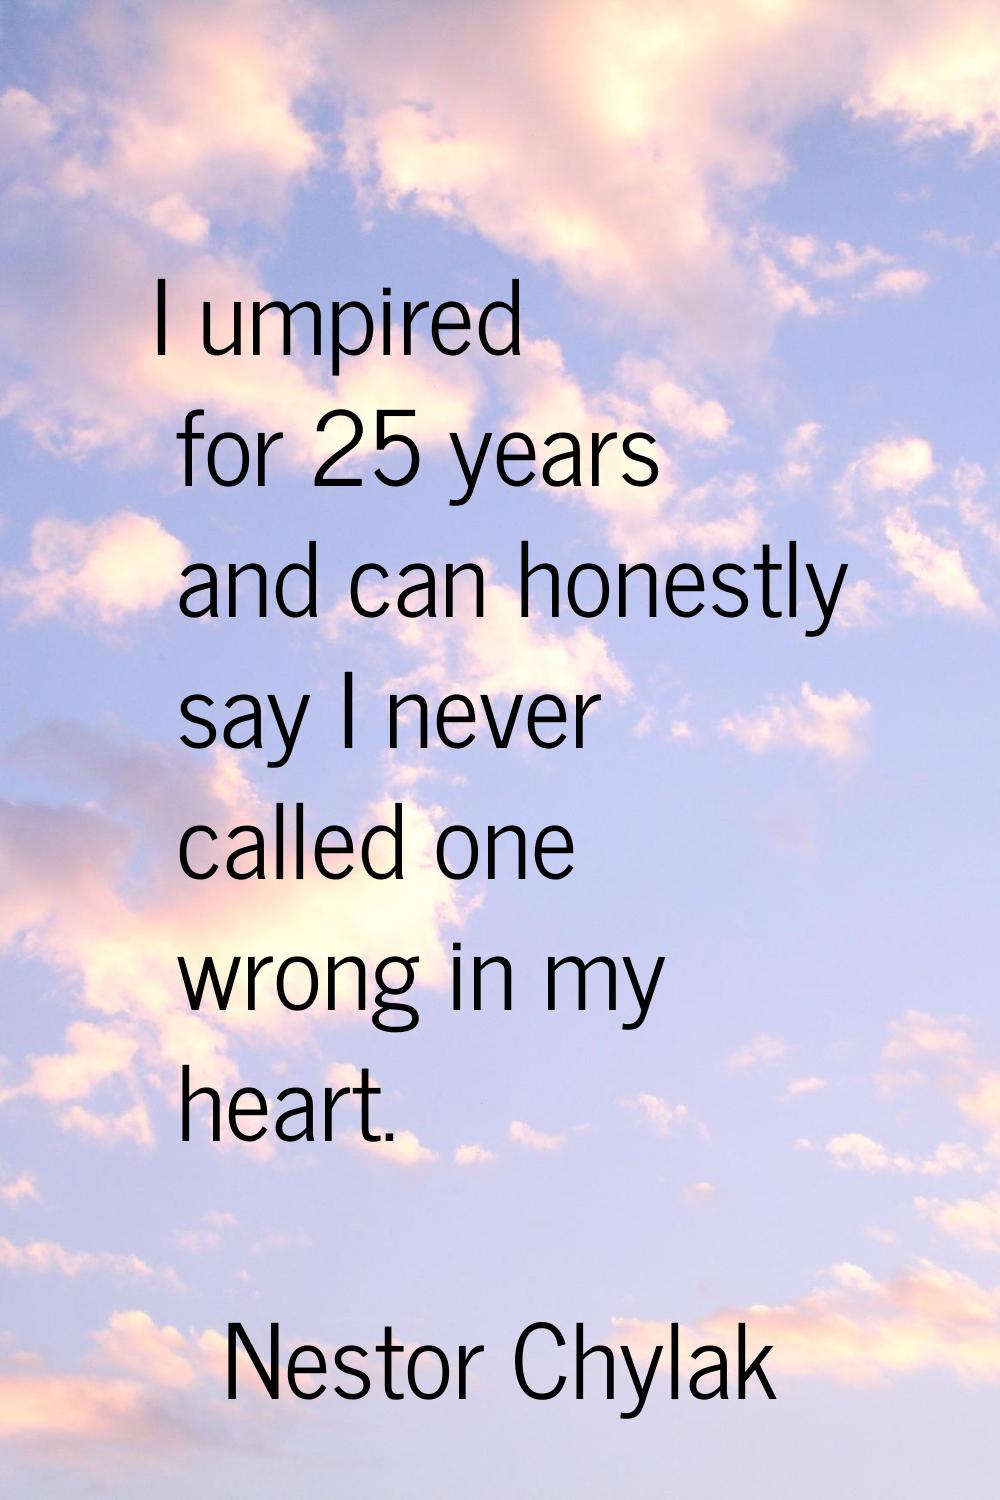 I umpired for 25 years and can honestly say I never called one wrong in my heart.